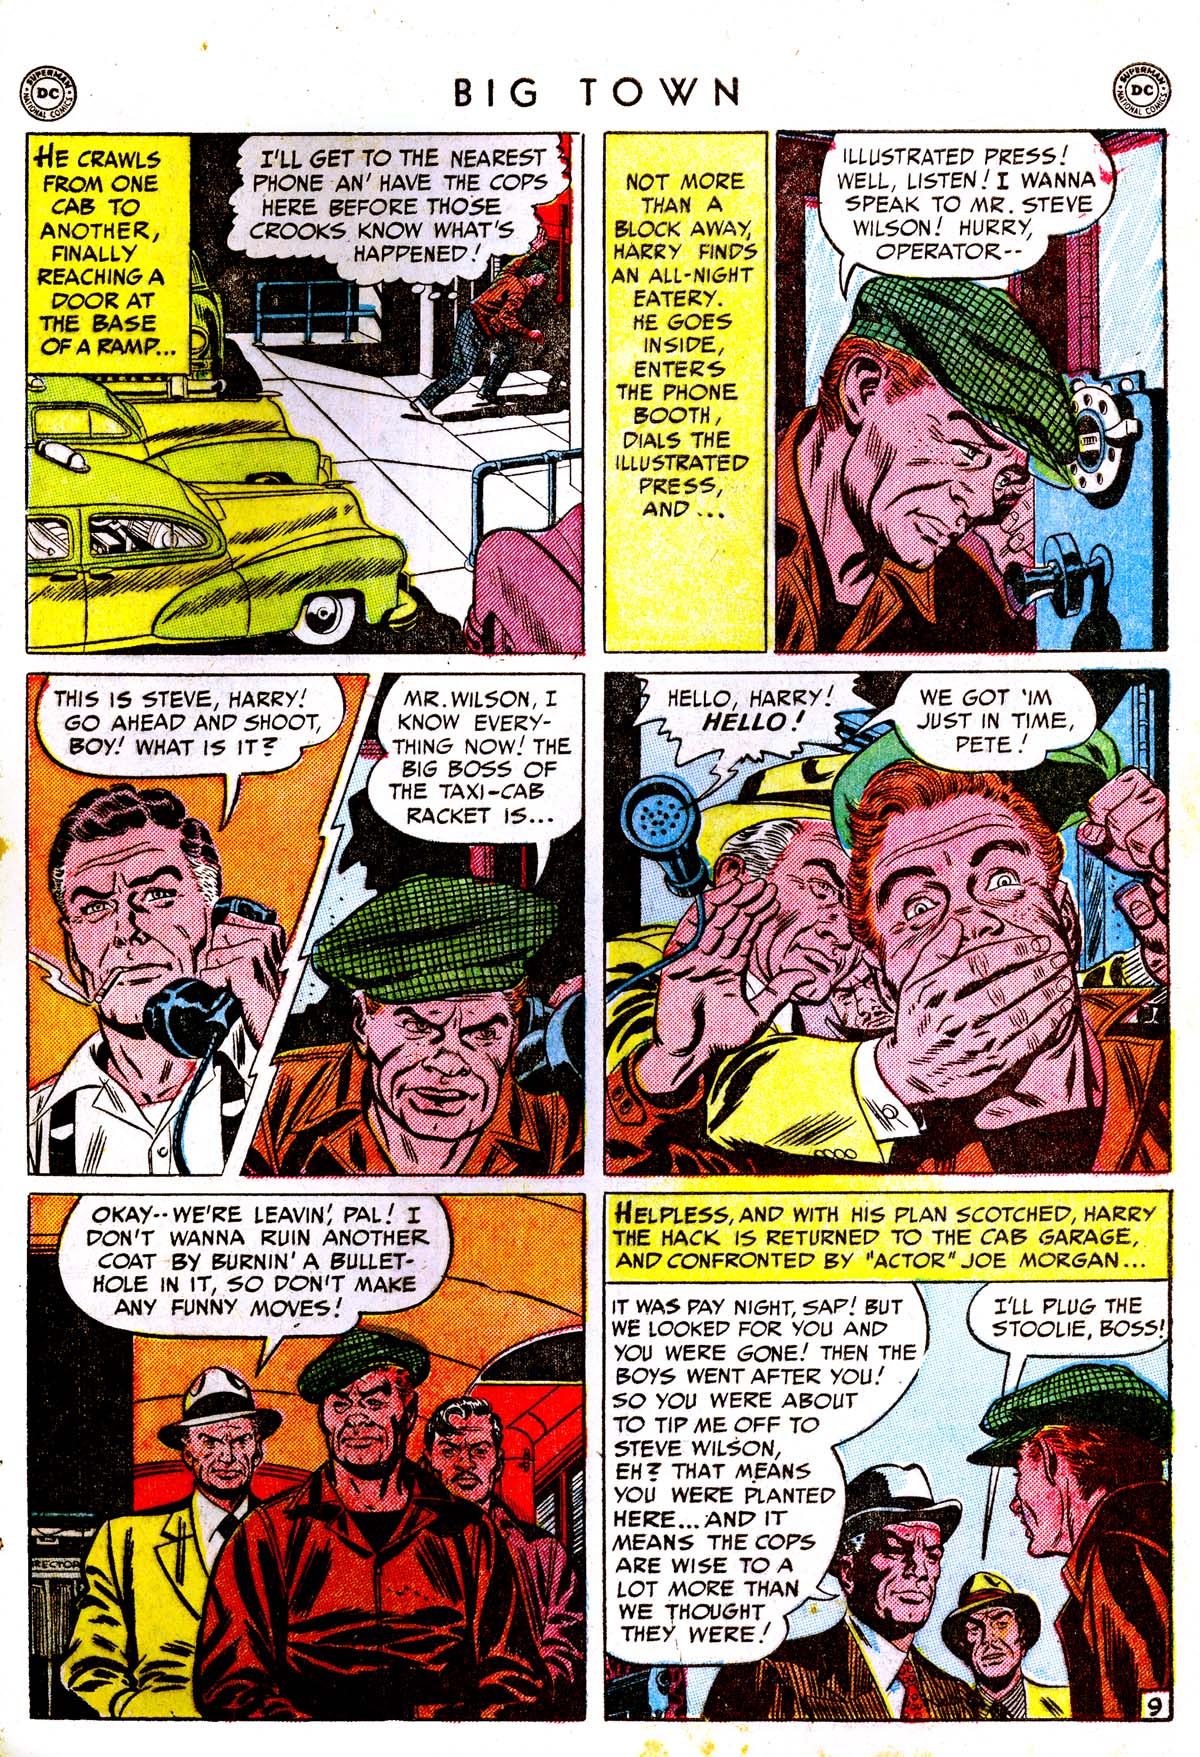 Big Town (1951) 1 Page 46